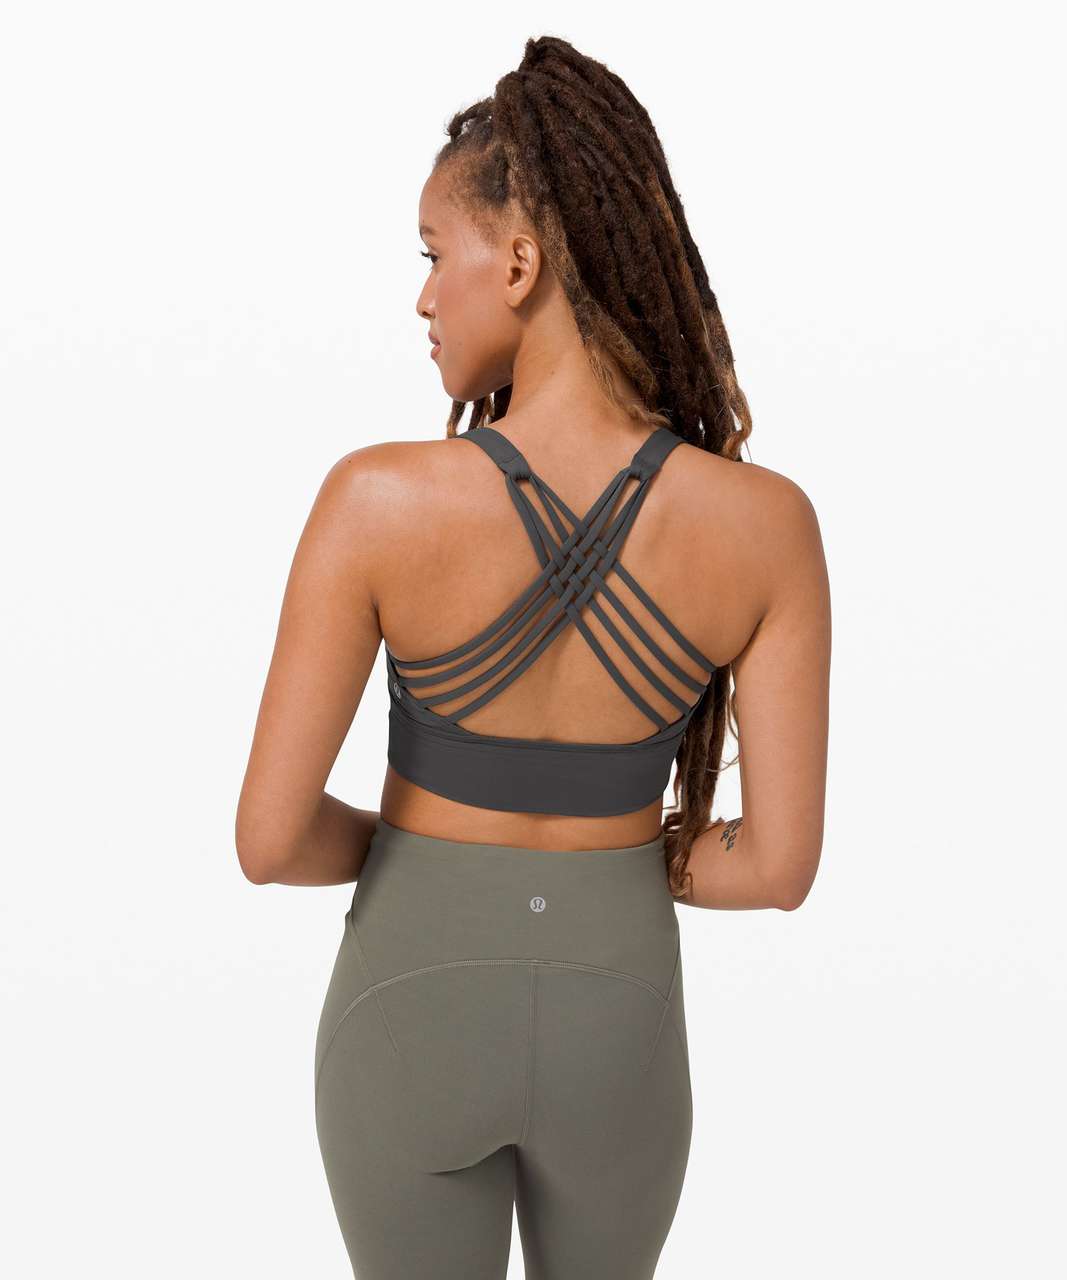 Lululemon Free to Be High-Neck Longline Bra - Wild *Light Support, A/B Cup - Graphite Grey